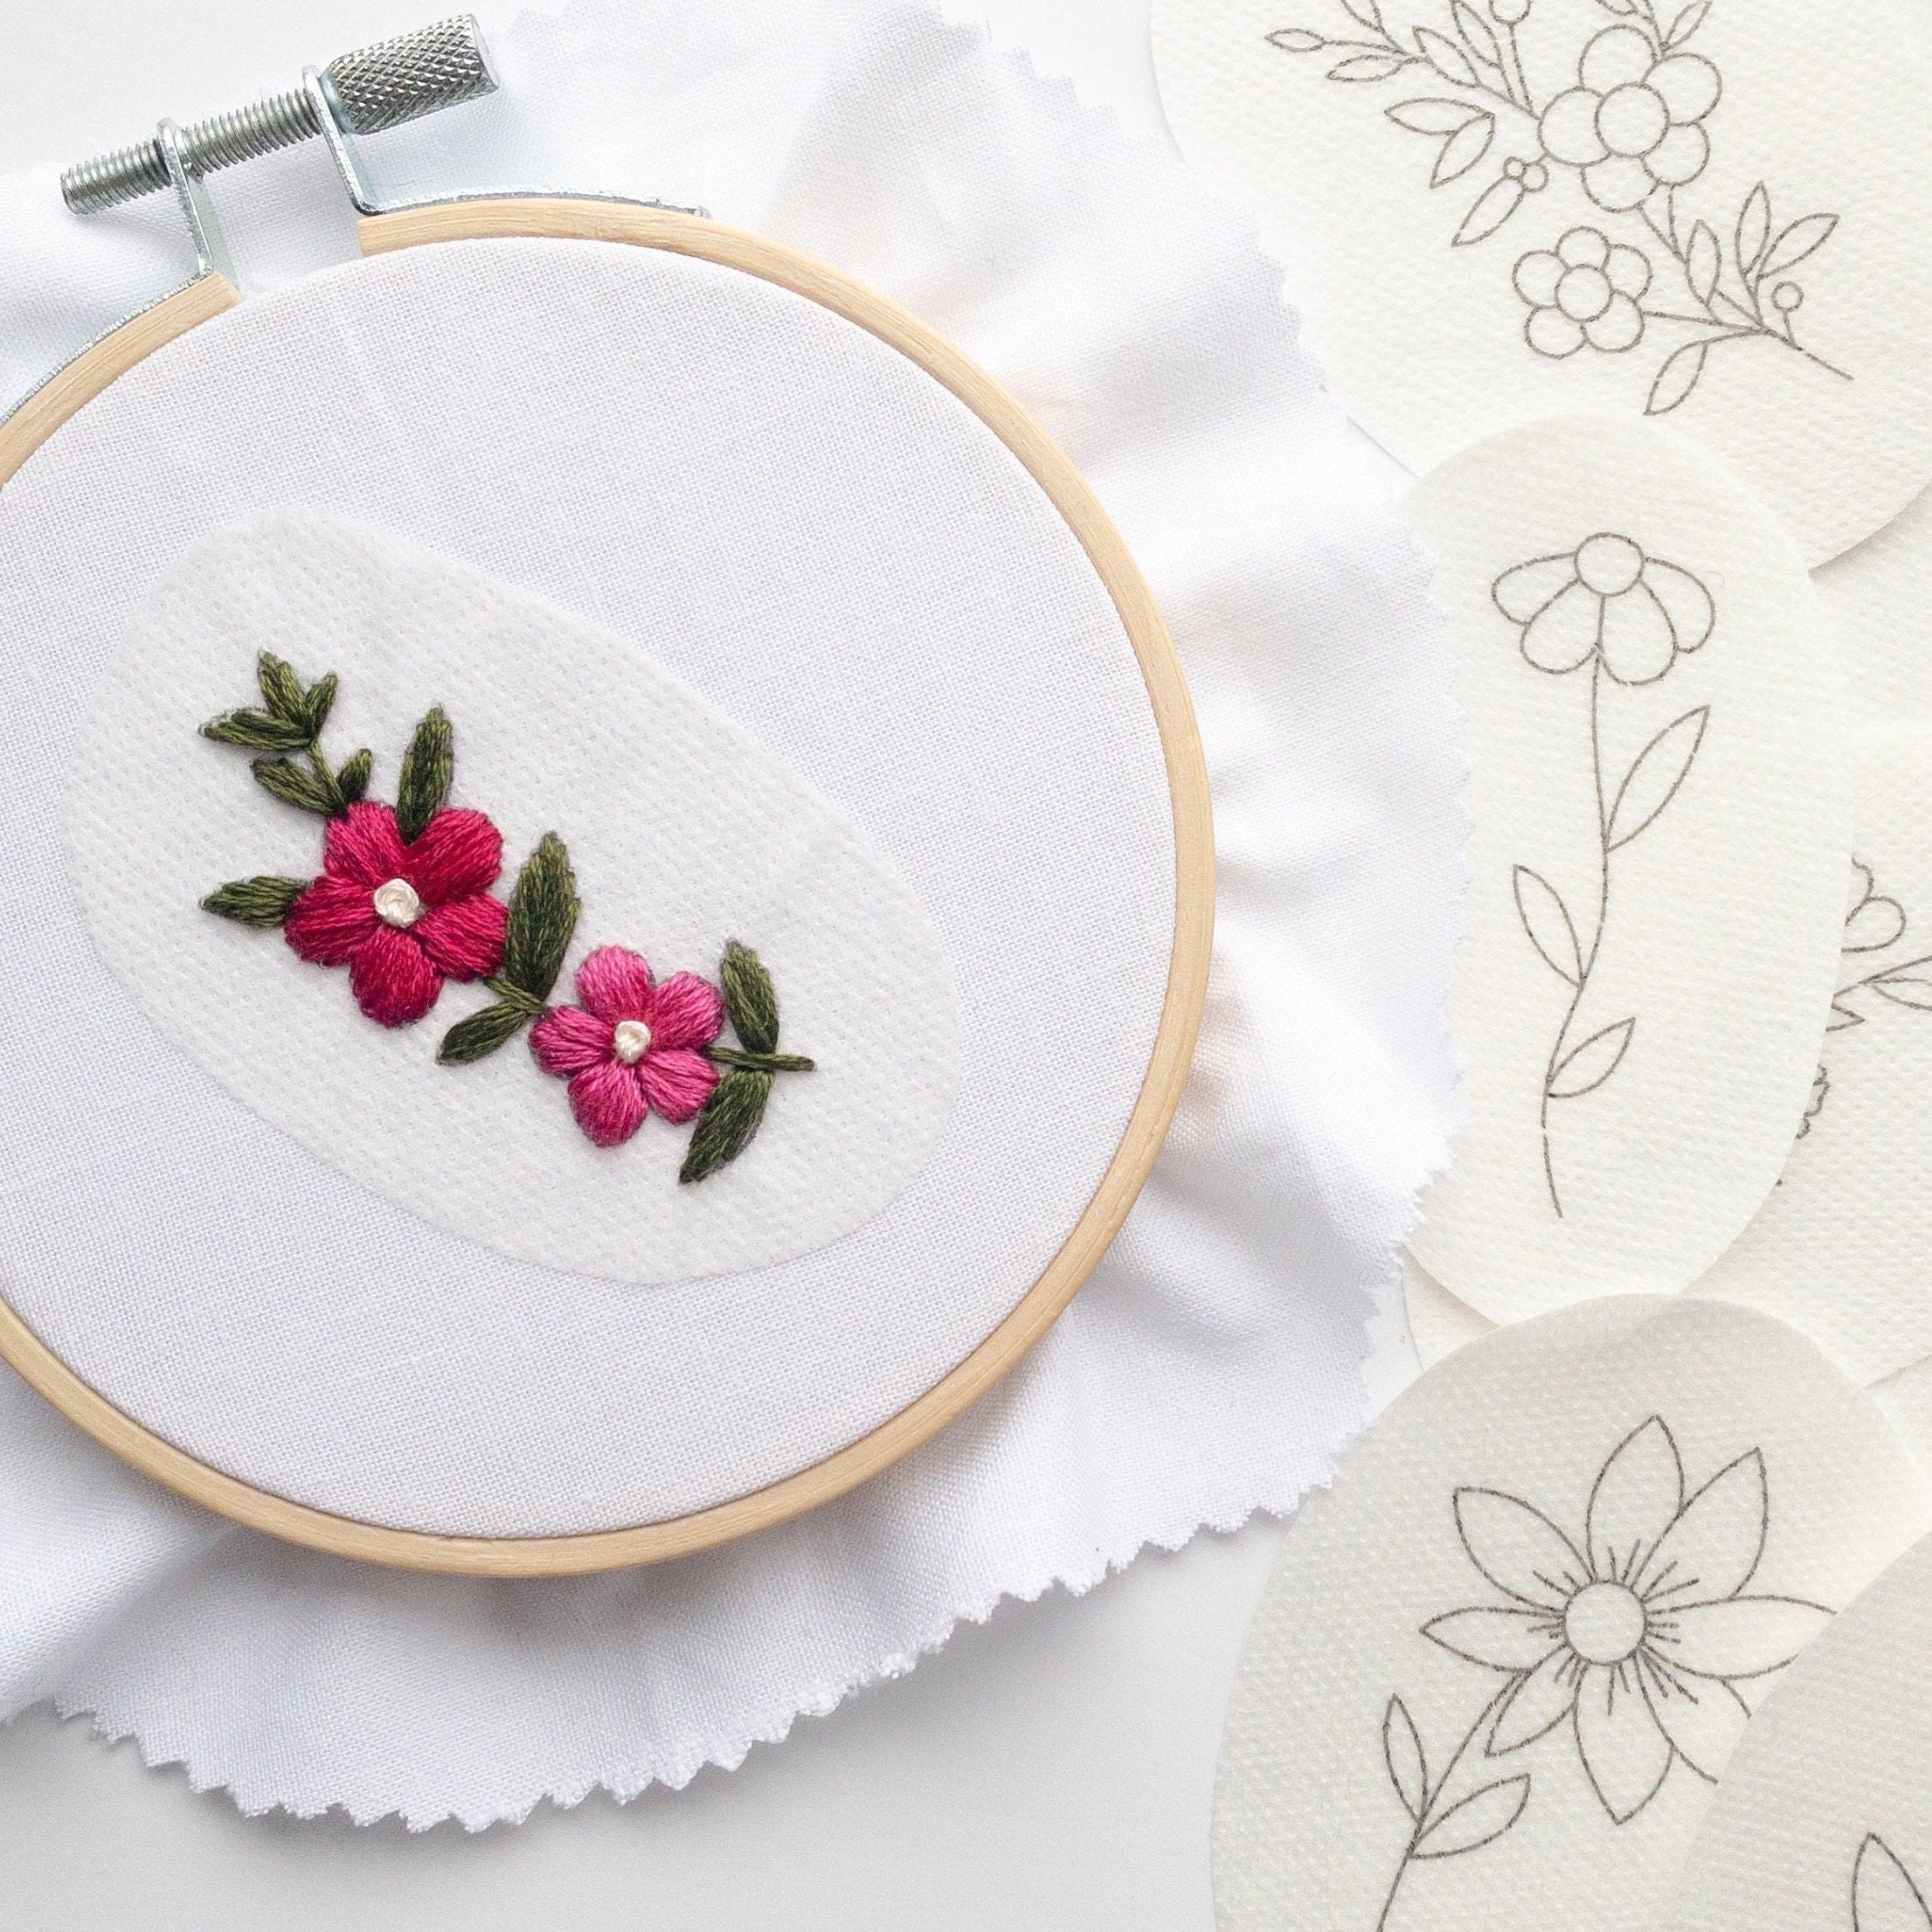 Wildflower Embroidery Patterns Stick and Stitch Embroidery picture photo